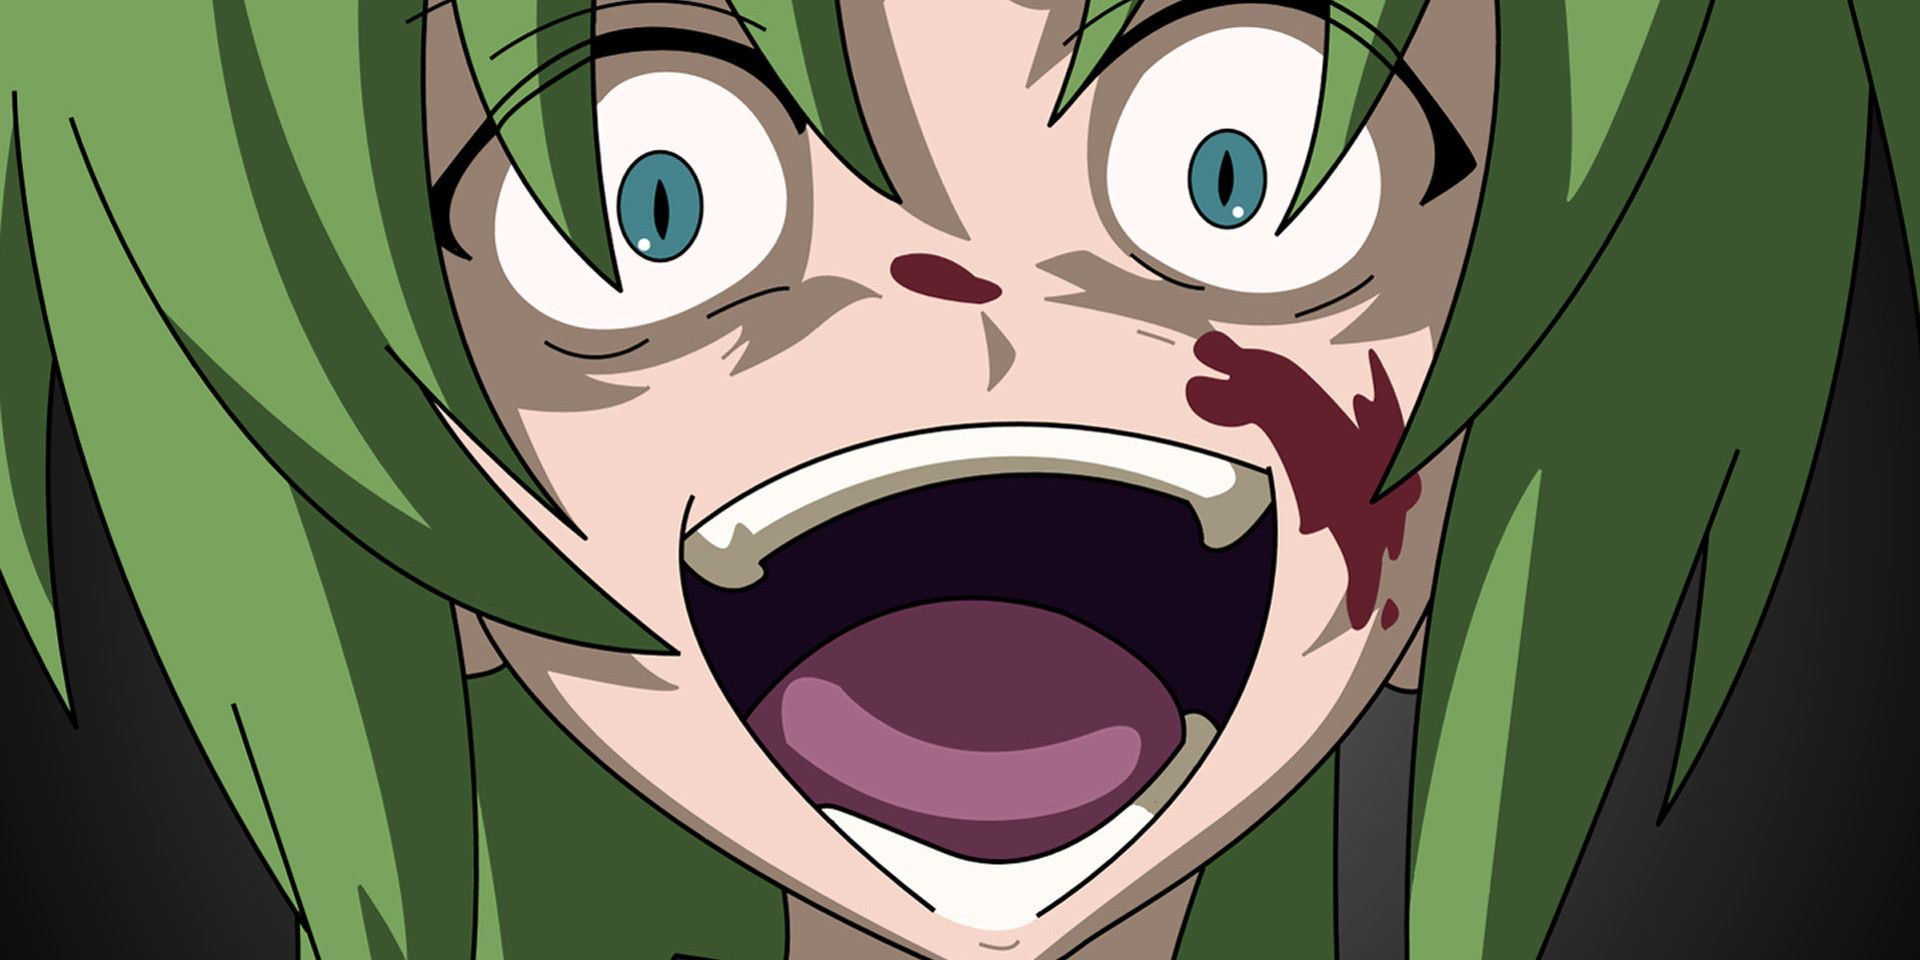 Shion from Higurashi: When They Cry.